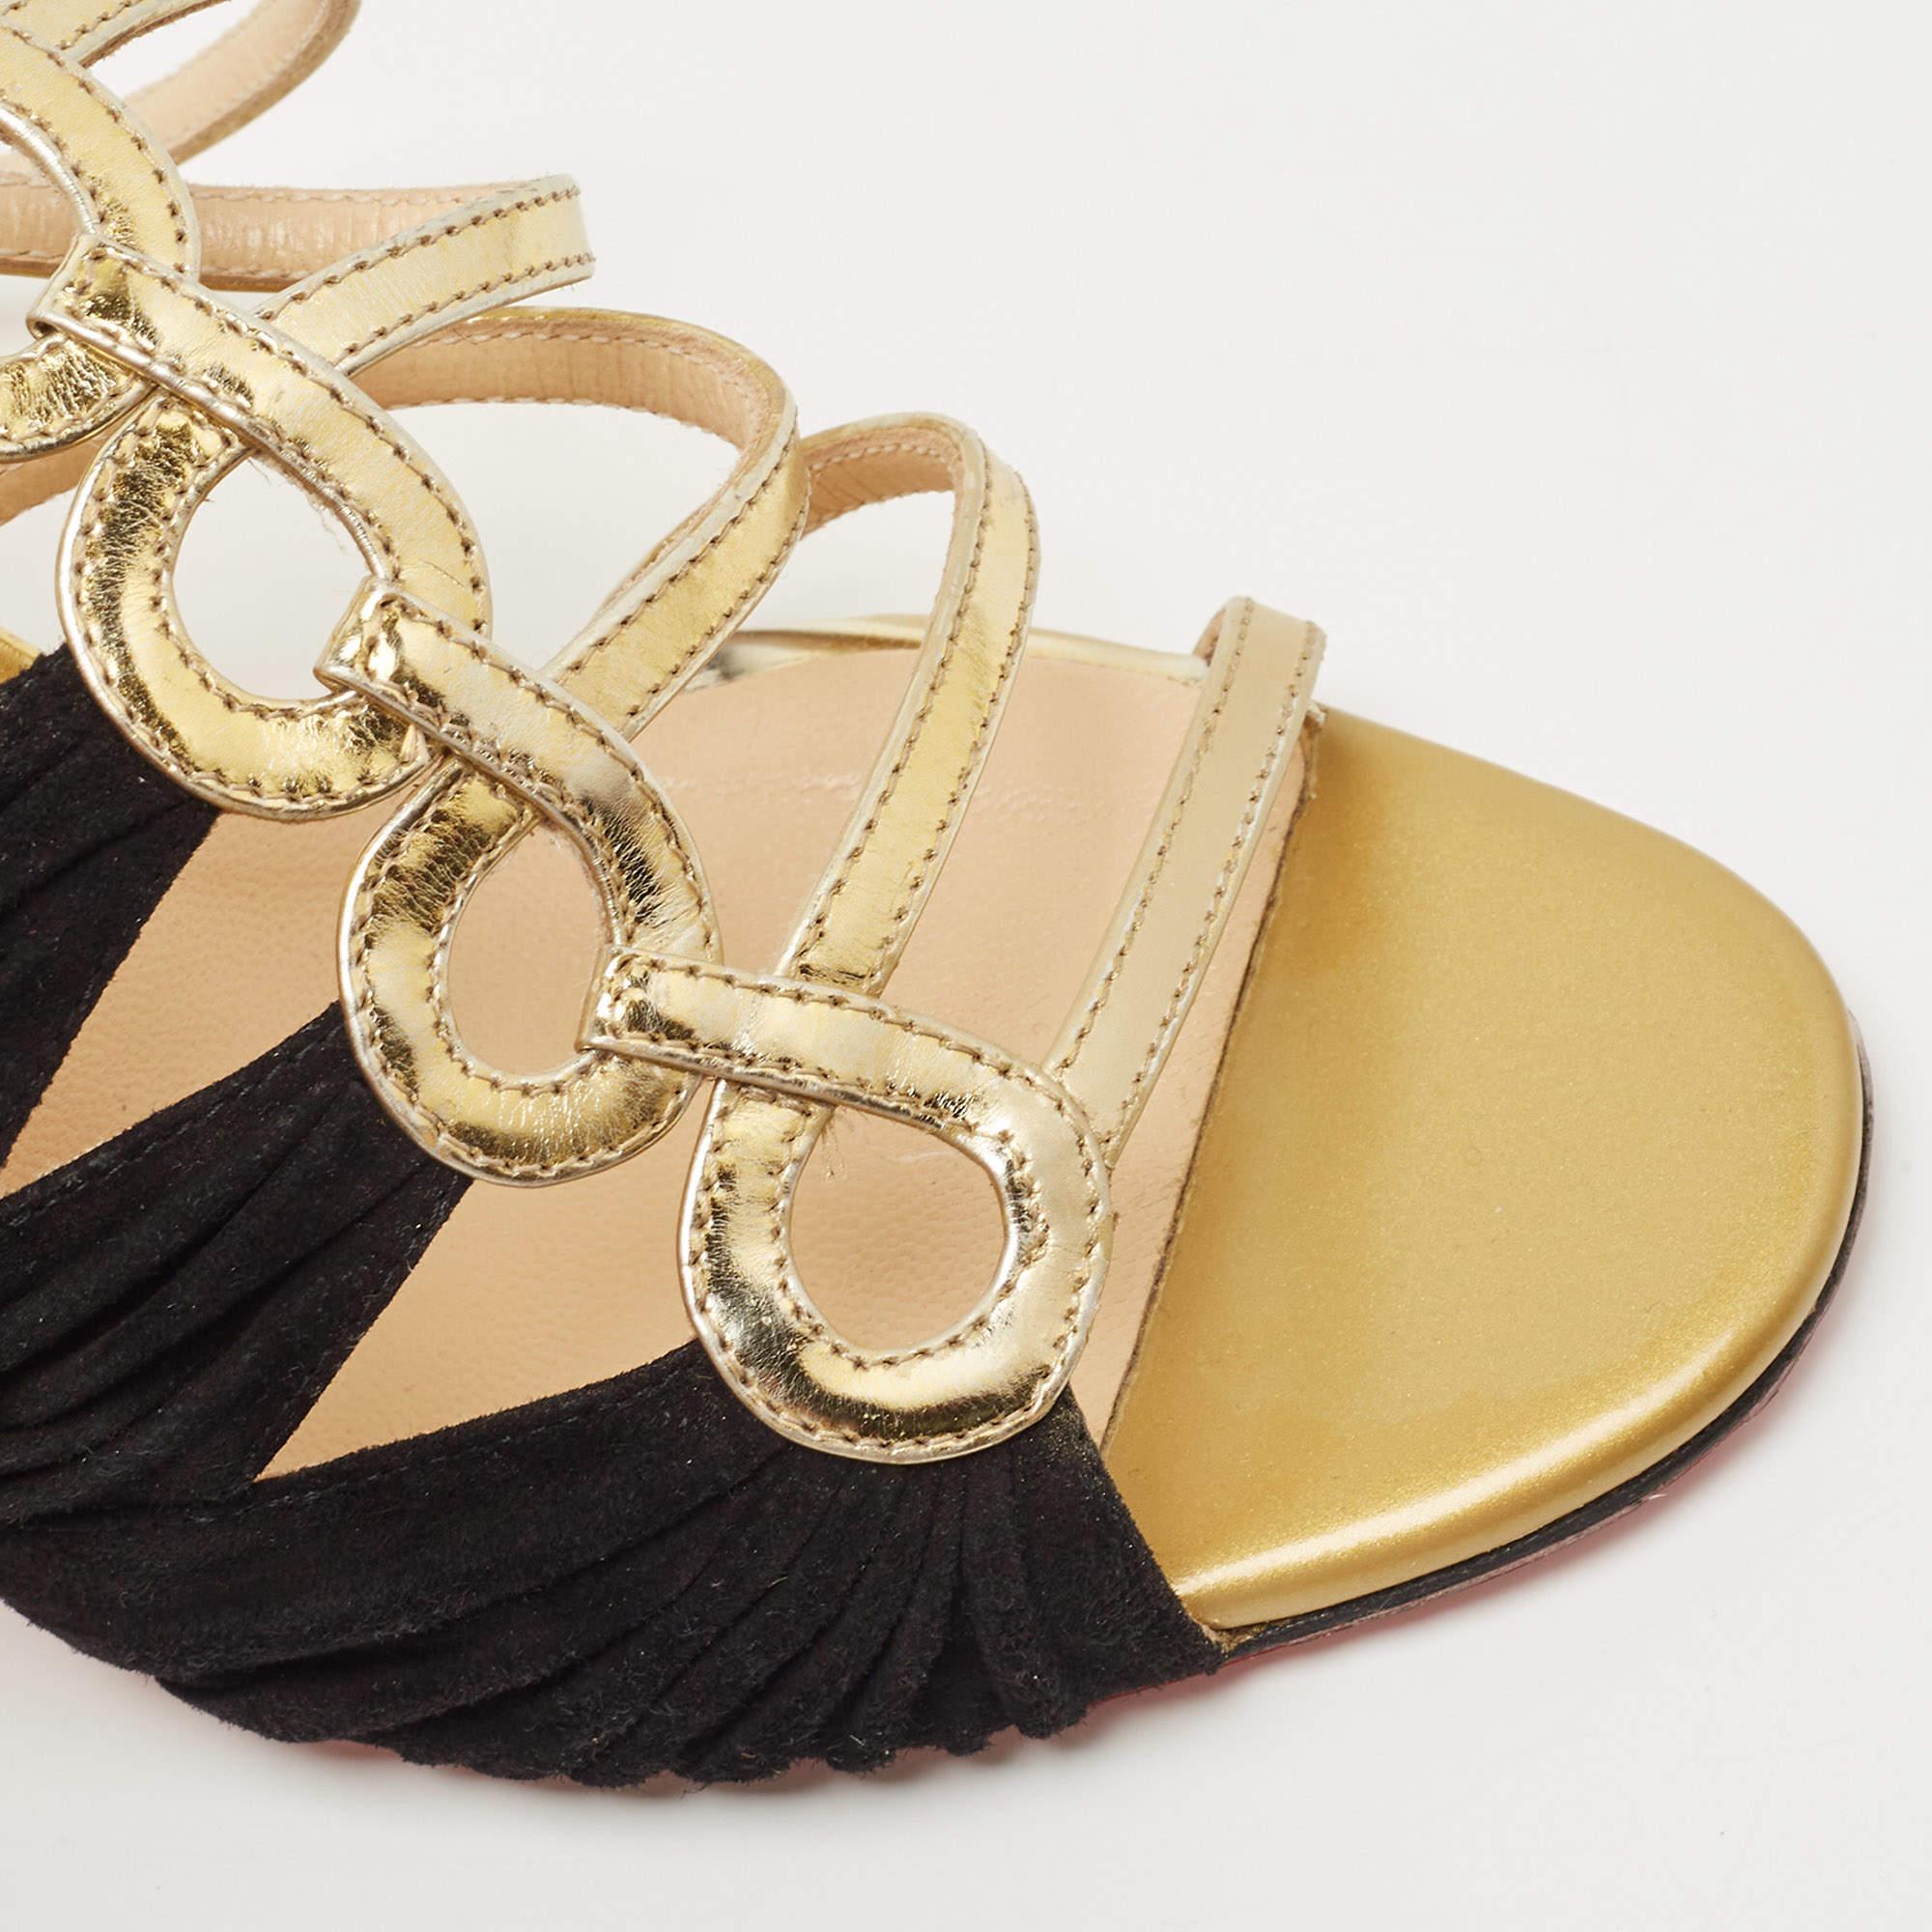 Christian Louboutin Black/Gold Suede and Leather Tina Sandals Size 37.5 For Sale 3